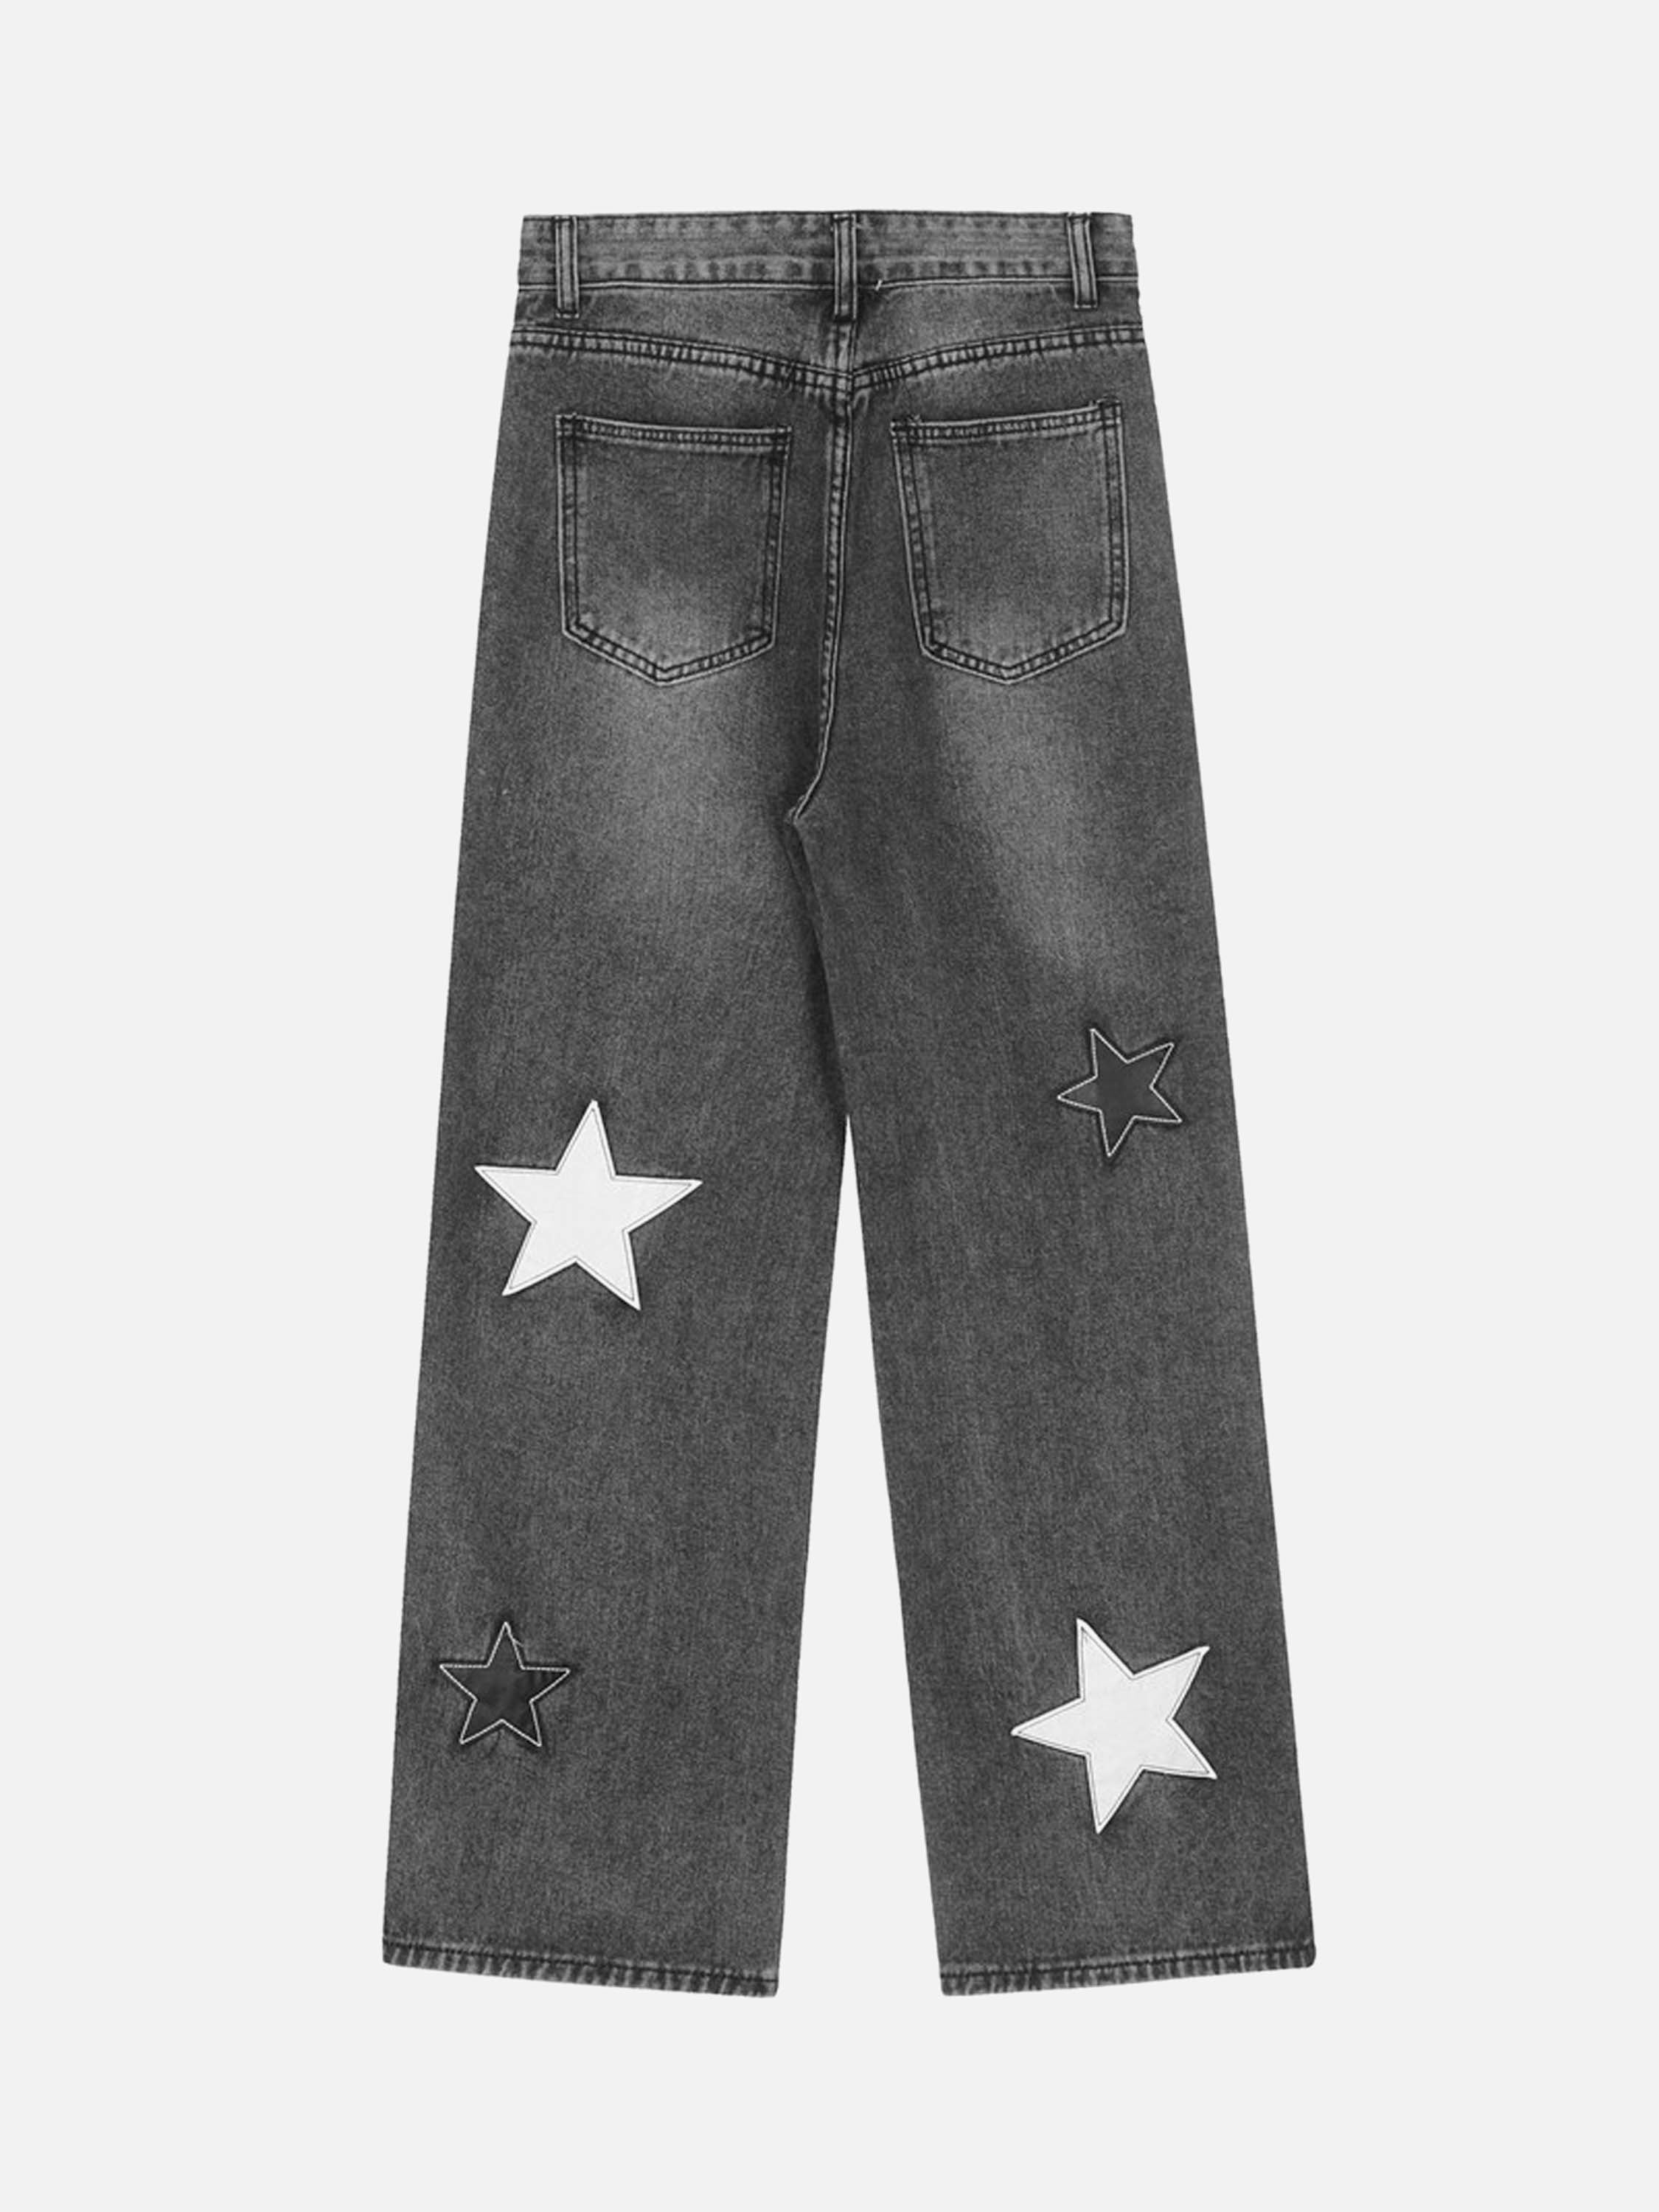 Thesupermade American Vintage Five-pointed Star Patch Embroidered Jeans Loose Straight-legged Pants -1439